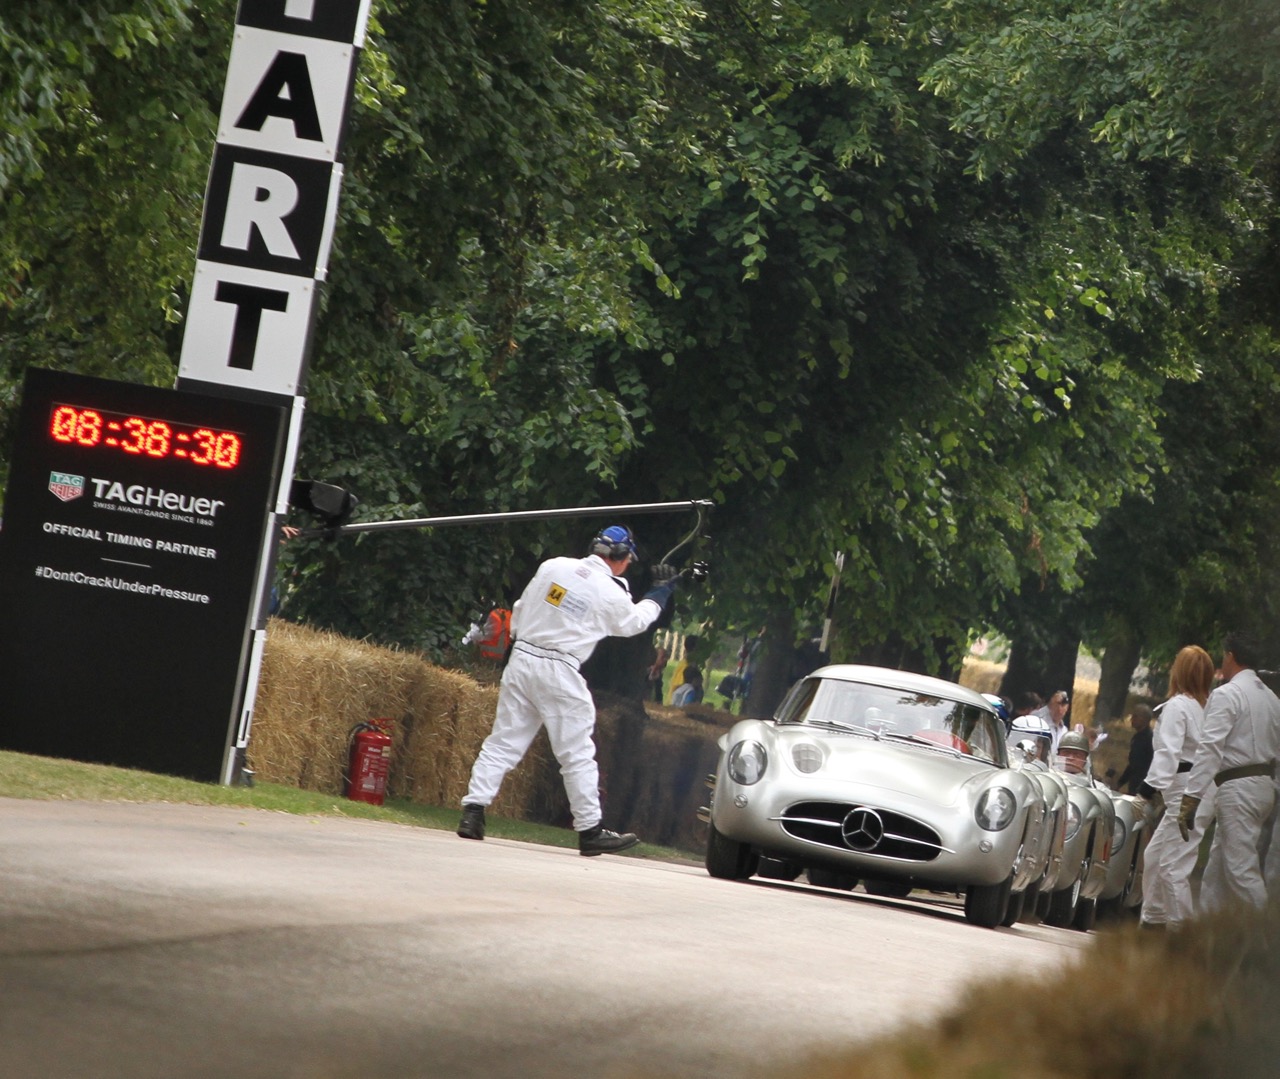 Vintage Mercedes heads up the hill in 2015